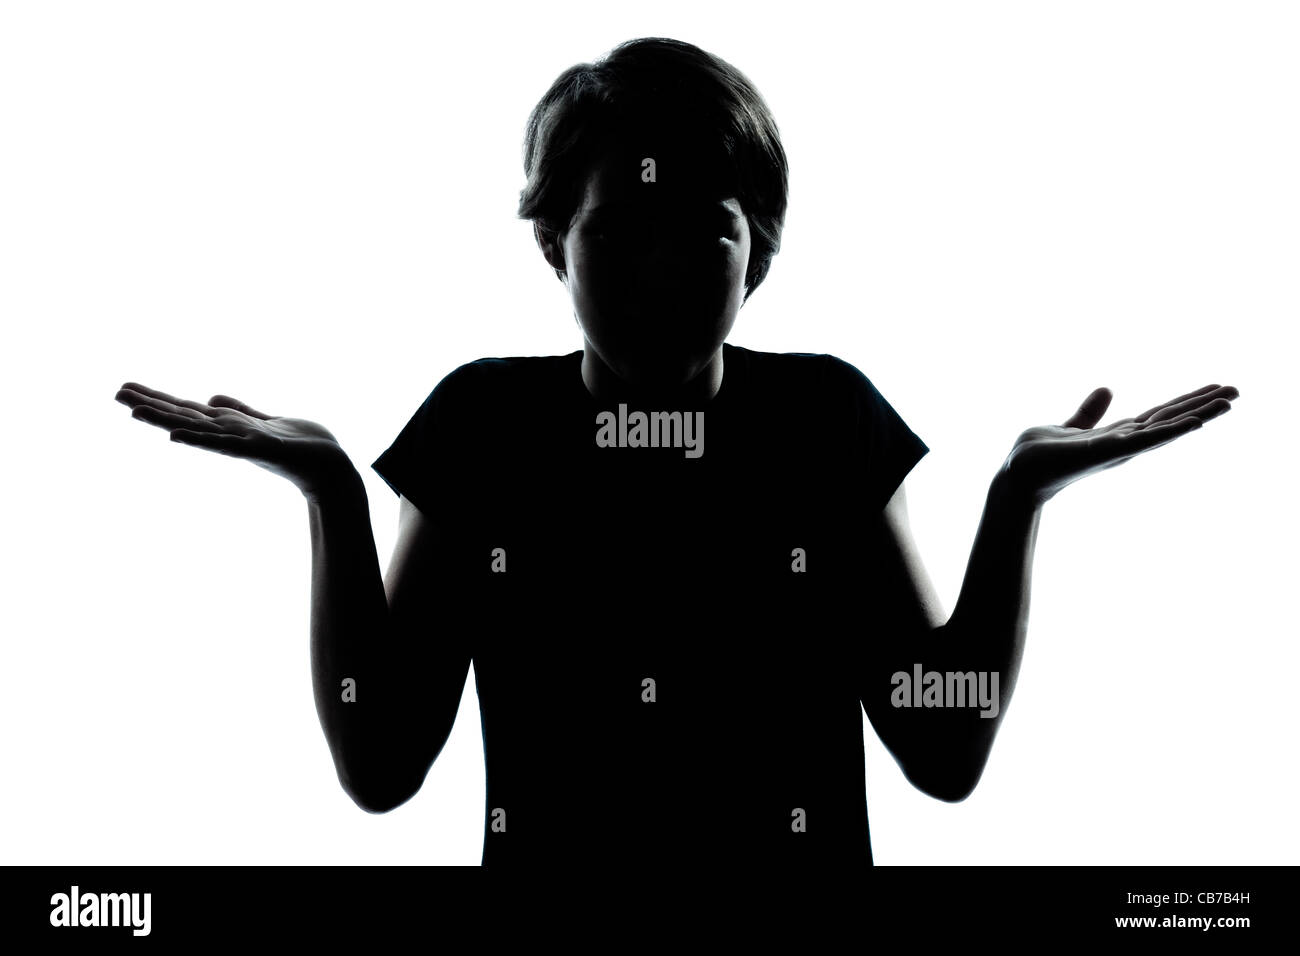 one  young teenager silhouette boy or girl ignorant hesitation shrugging gesture portrait in studio cut out isolated on white background Stock Photo